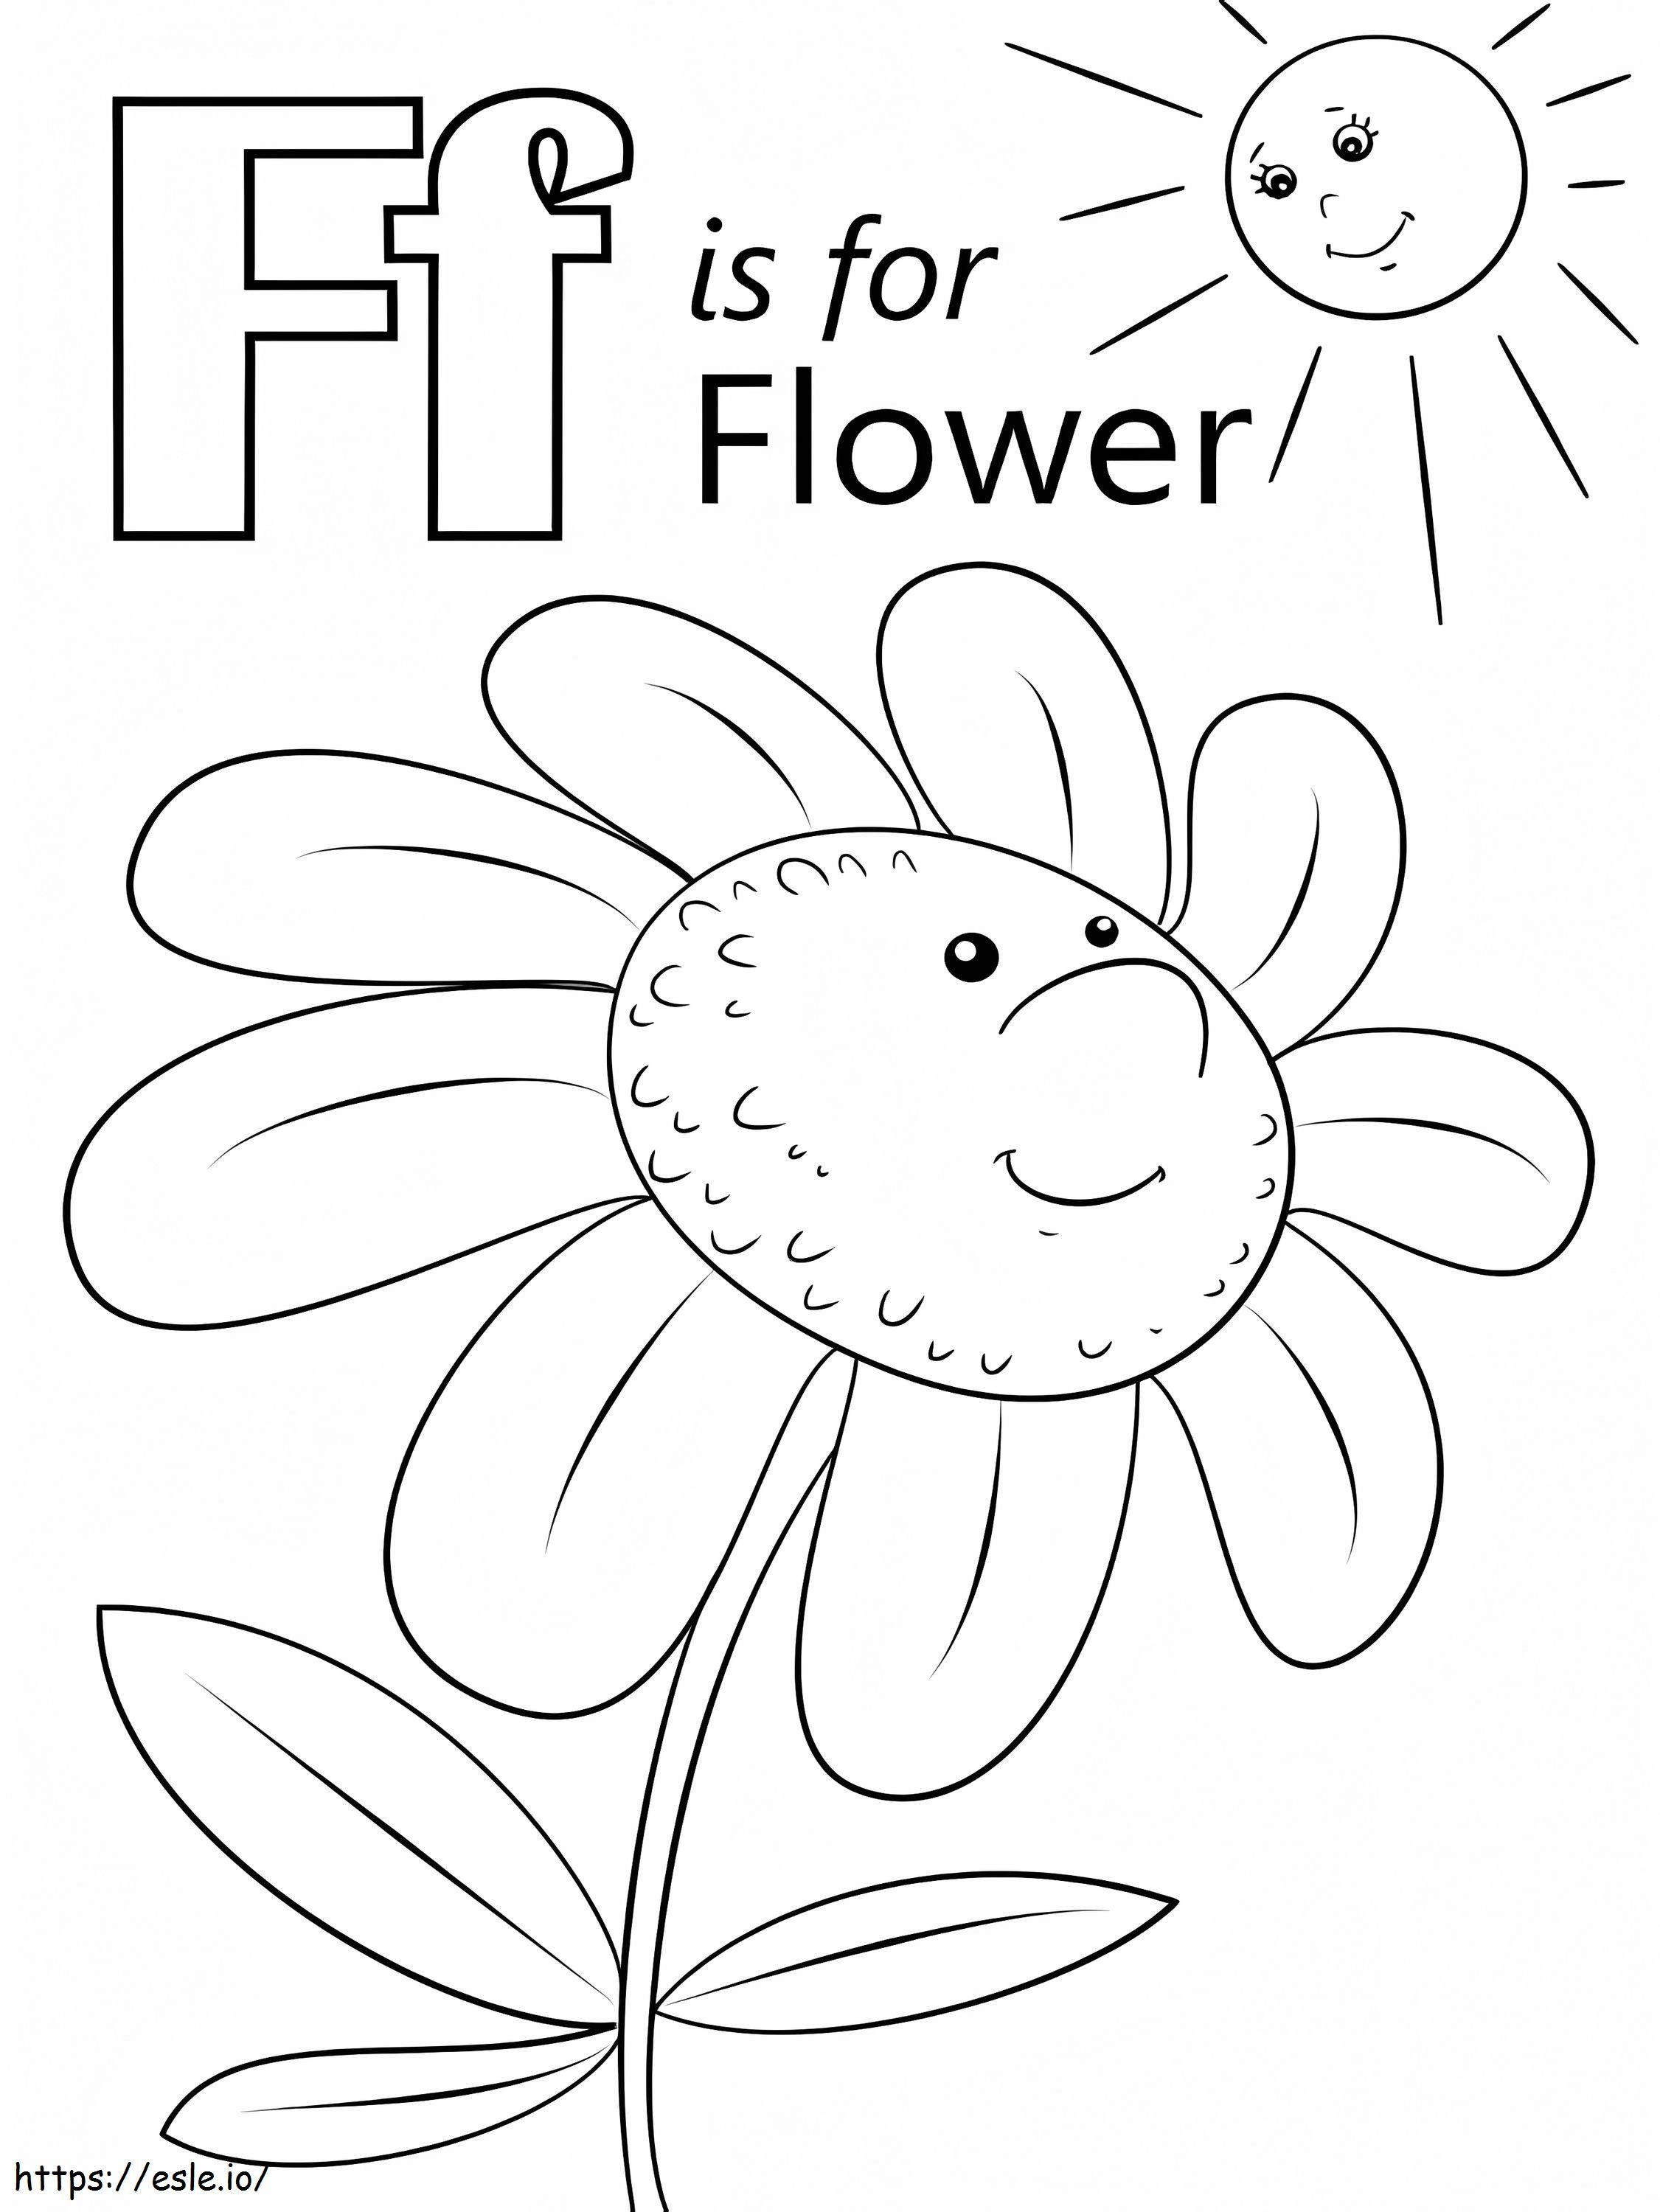 Flower Letter F coloring page